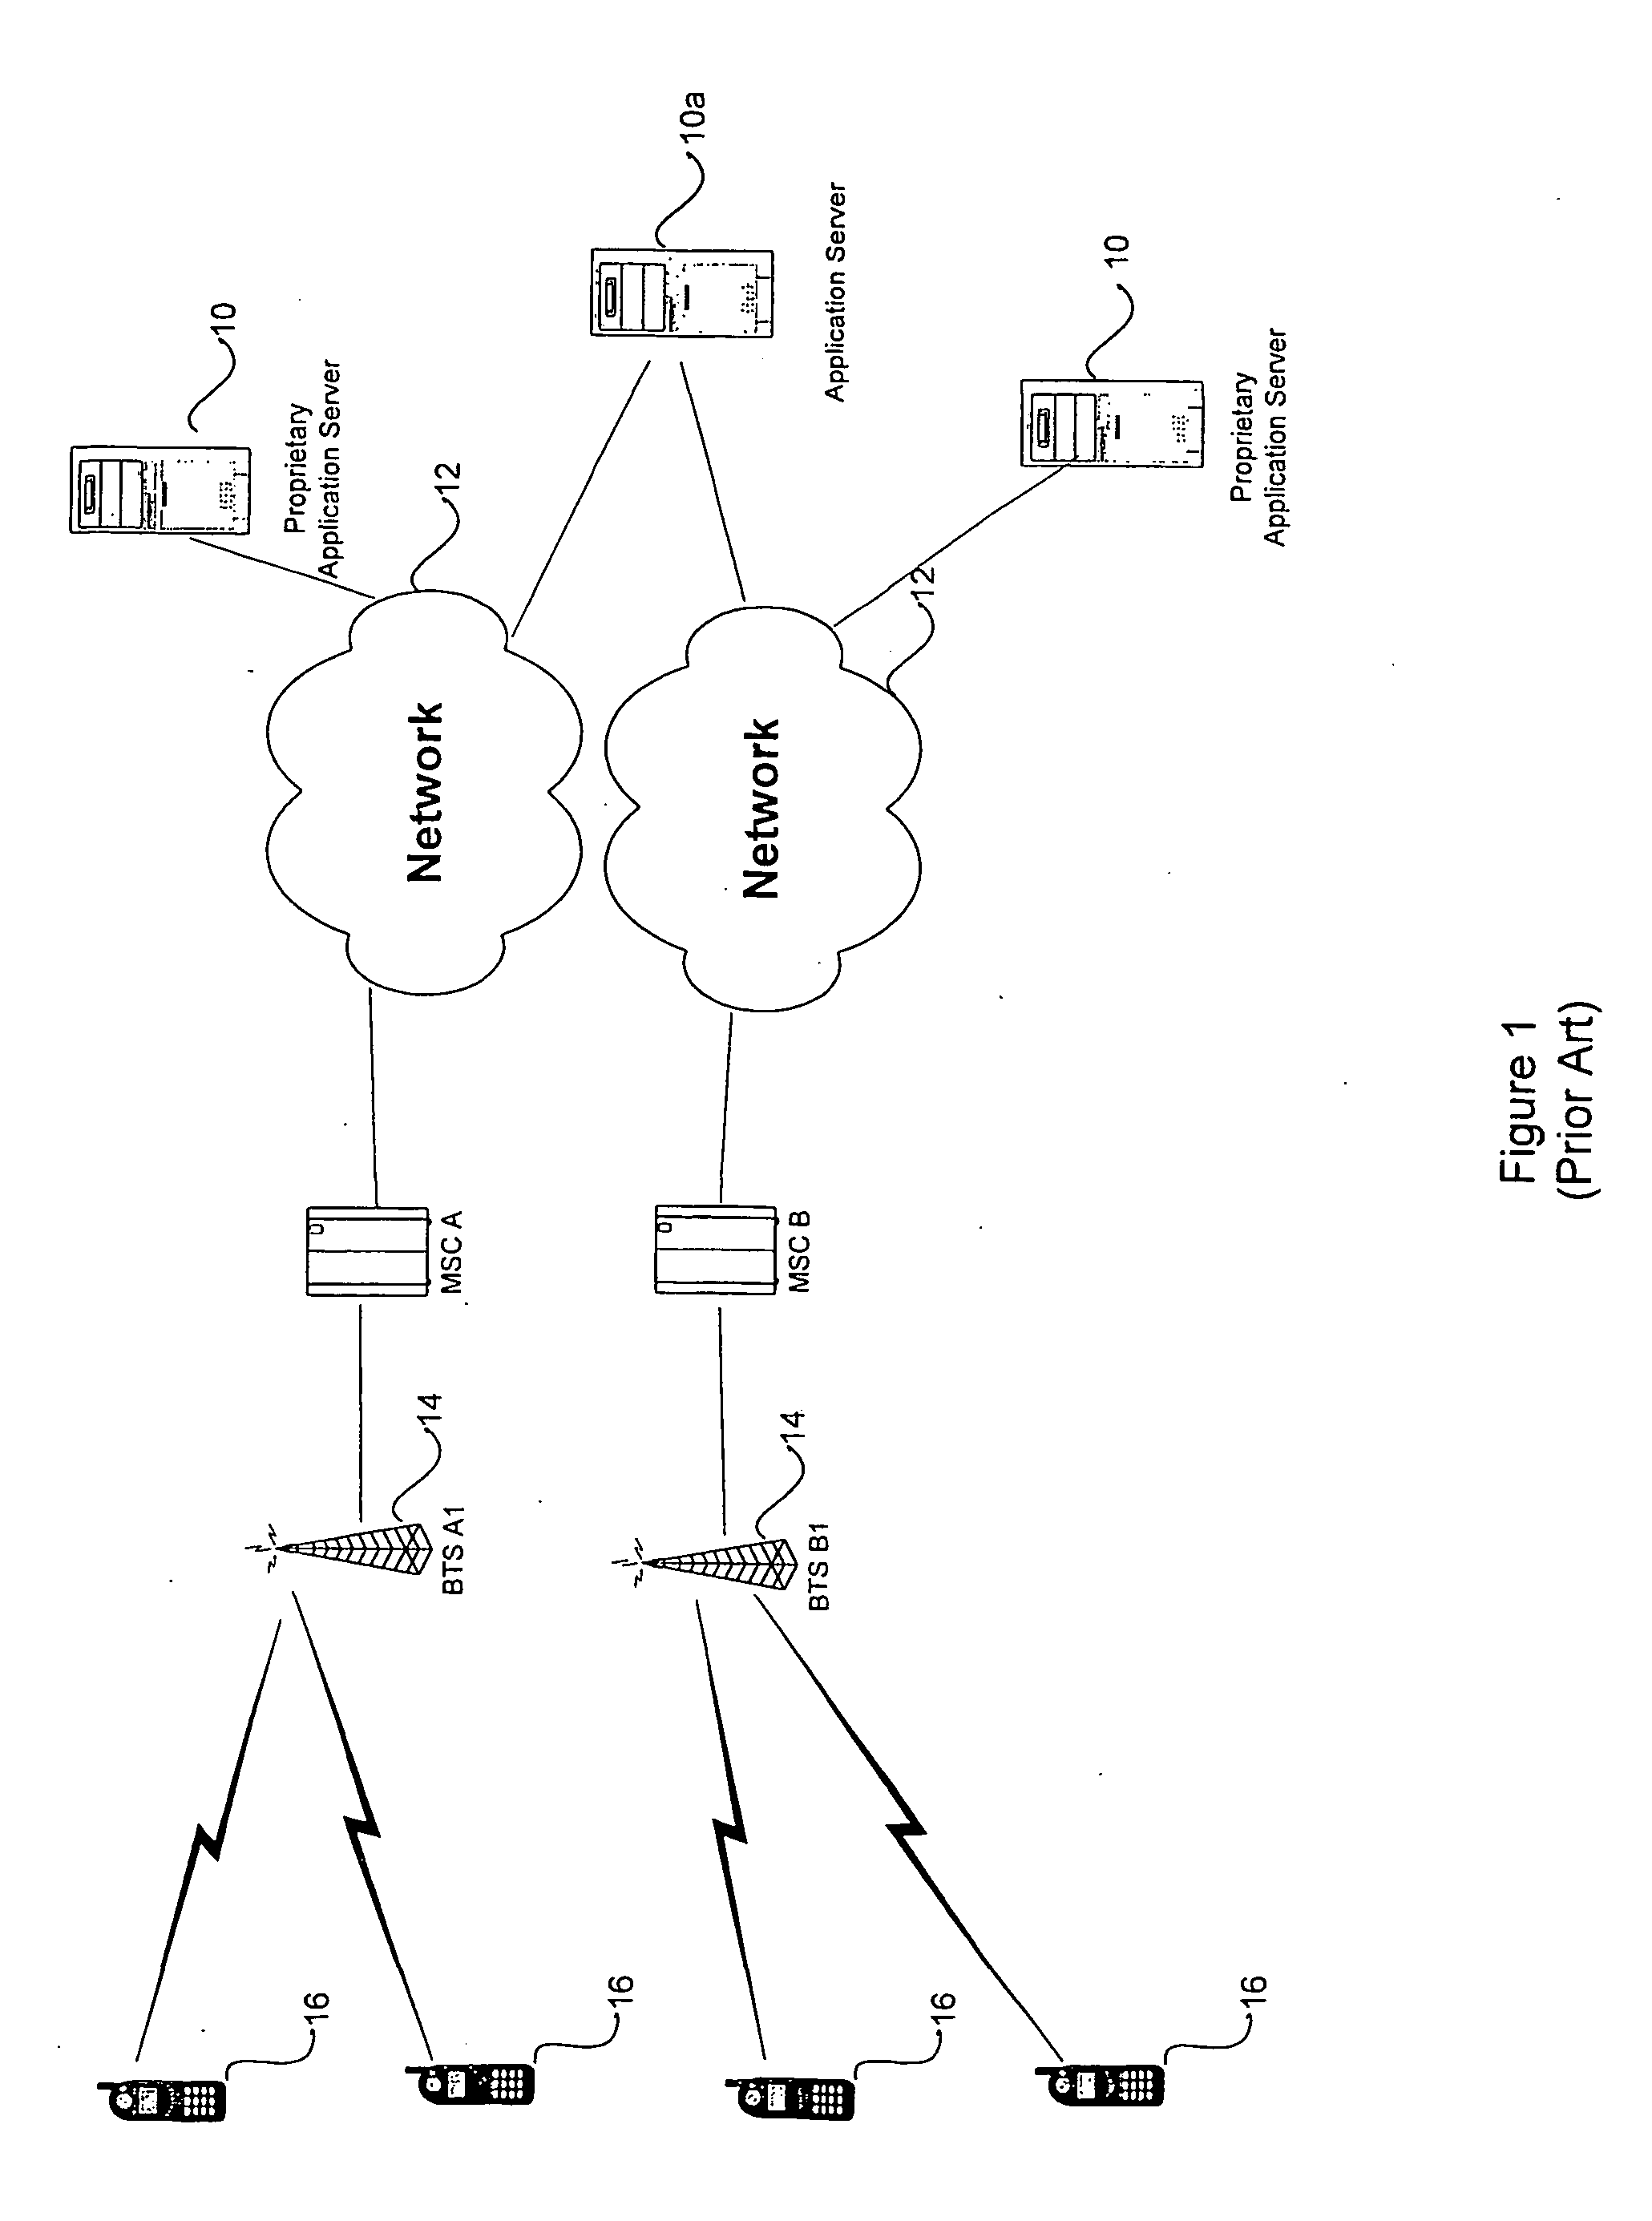 Method and system for dynamic spectrum allocation and management